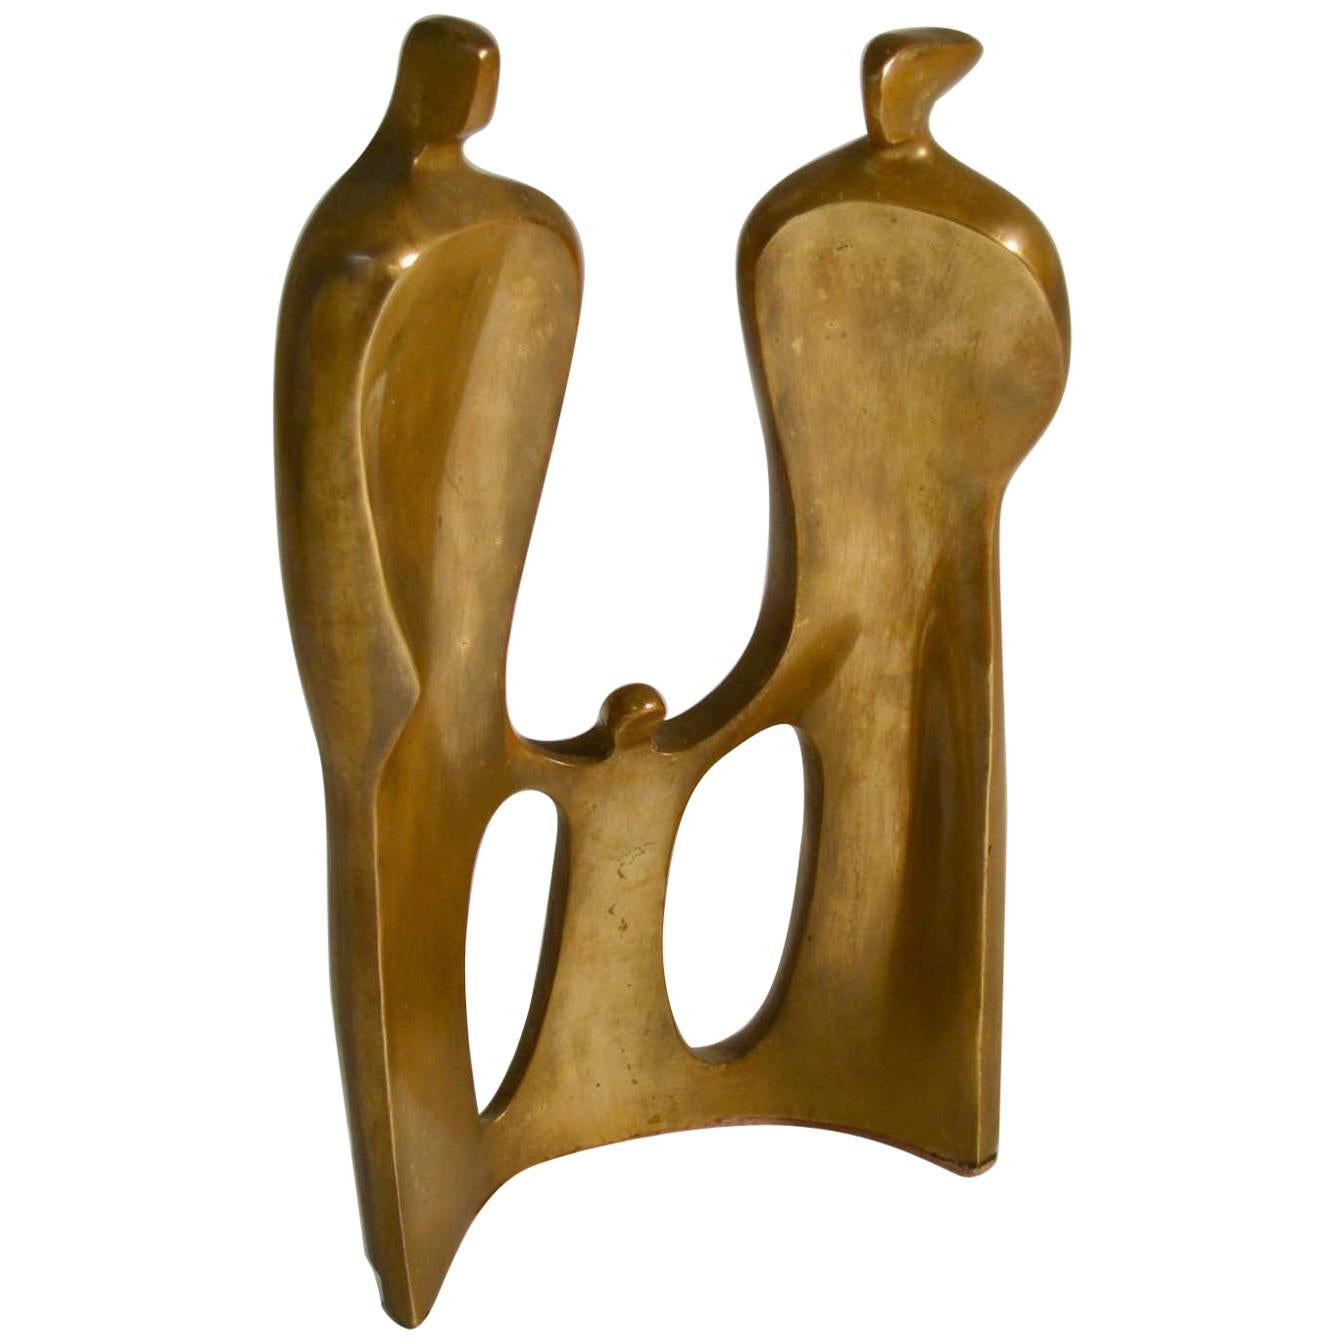 European Tall Figurative Bronze Sculpture of Family by Maria Guernova, 1985 For Sale